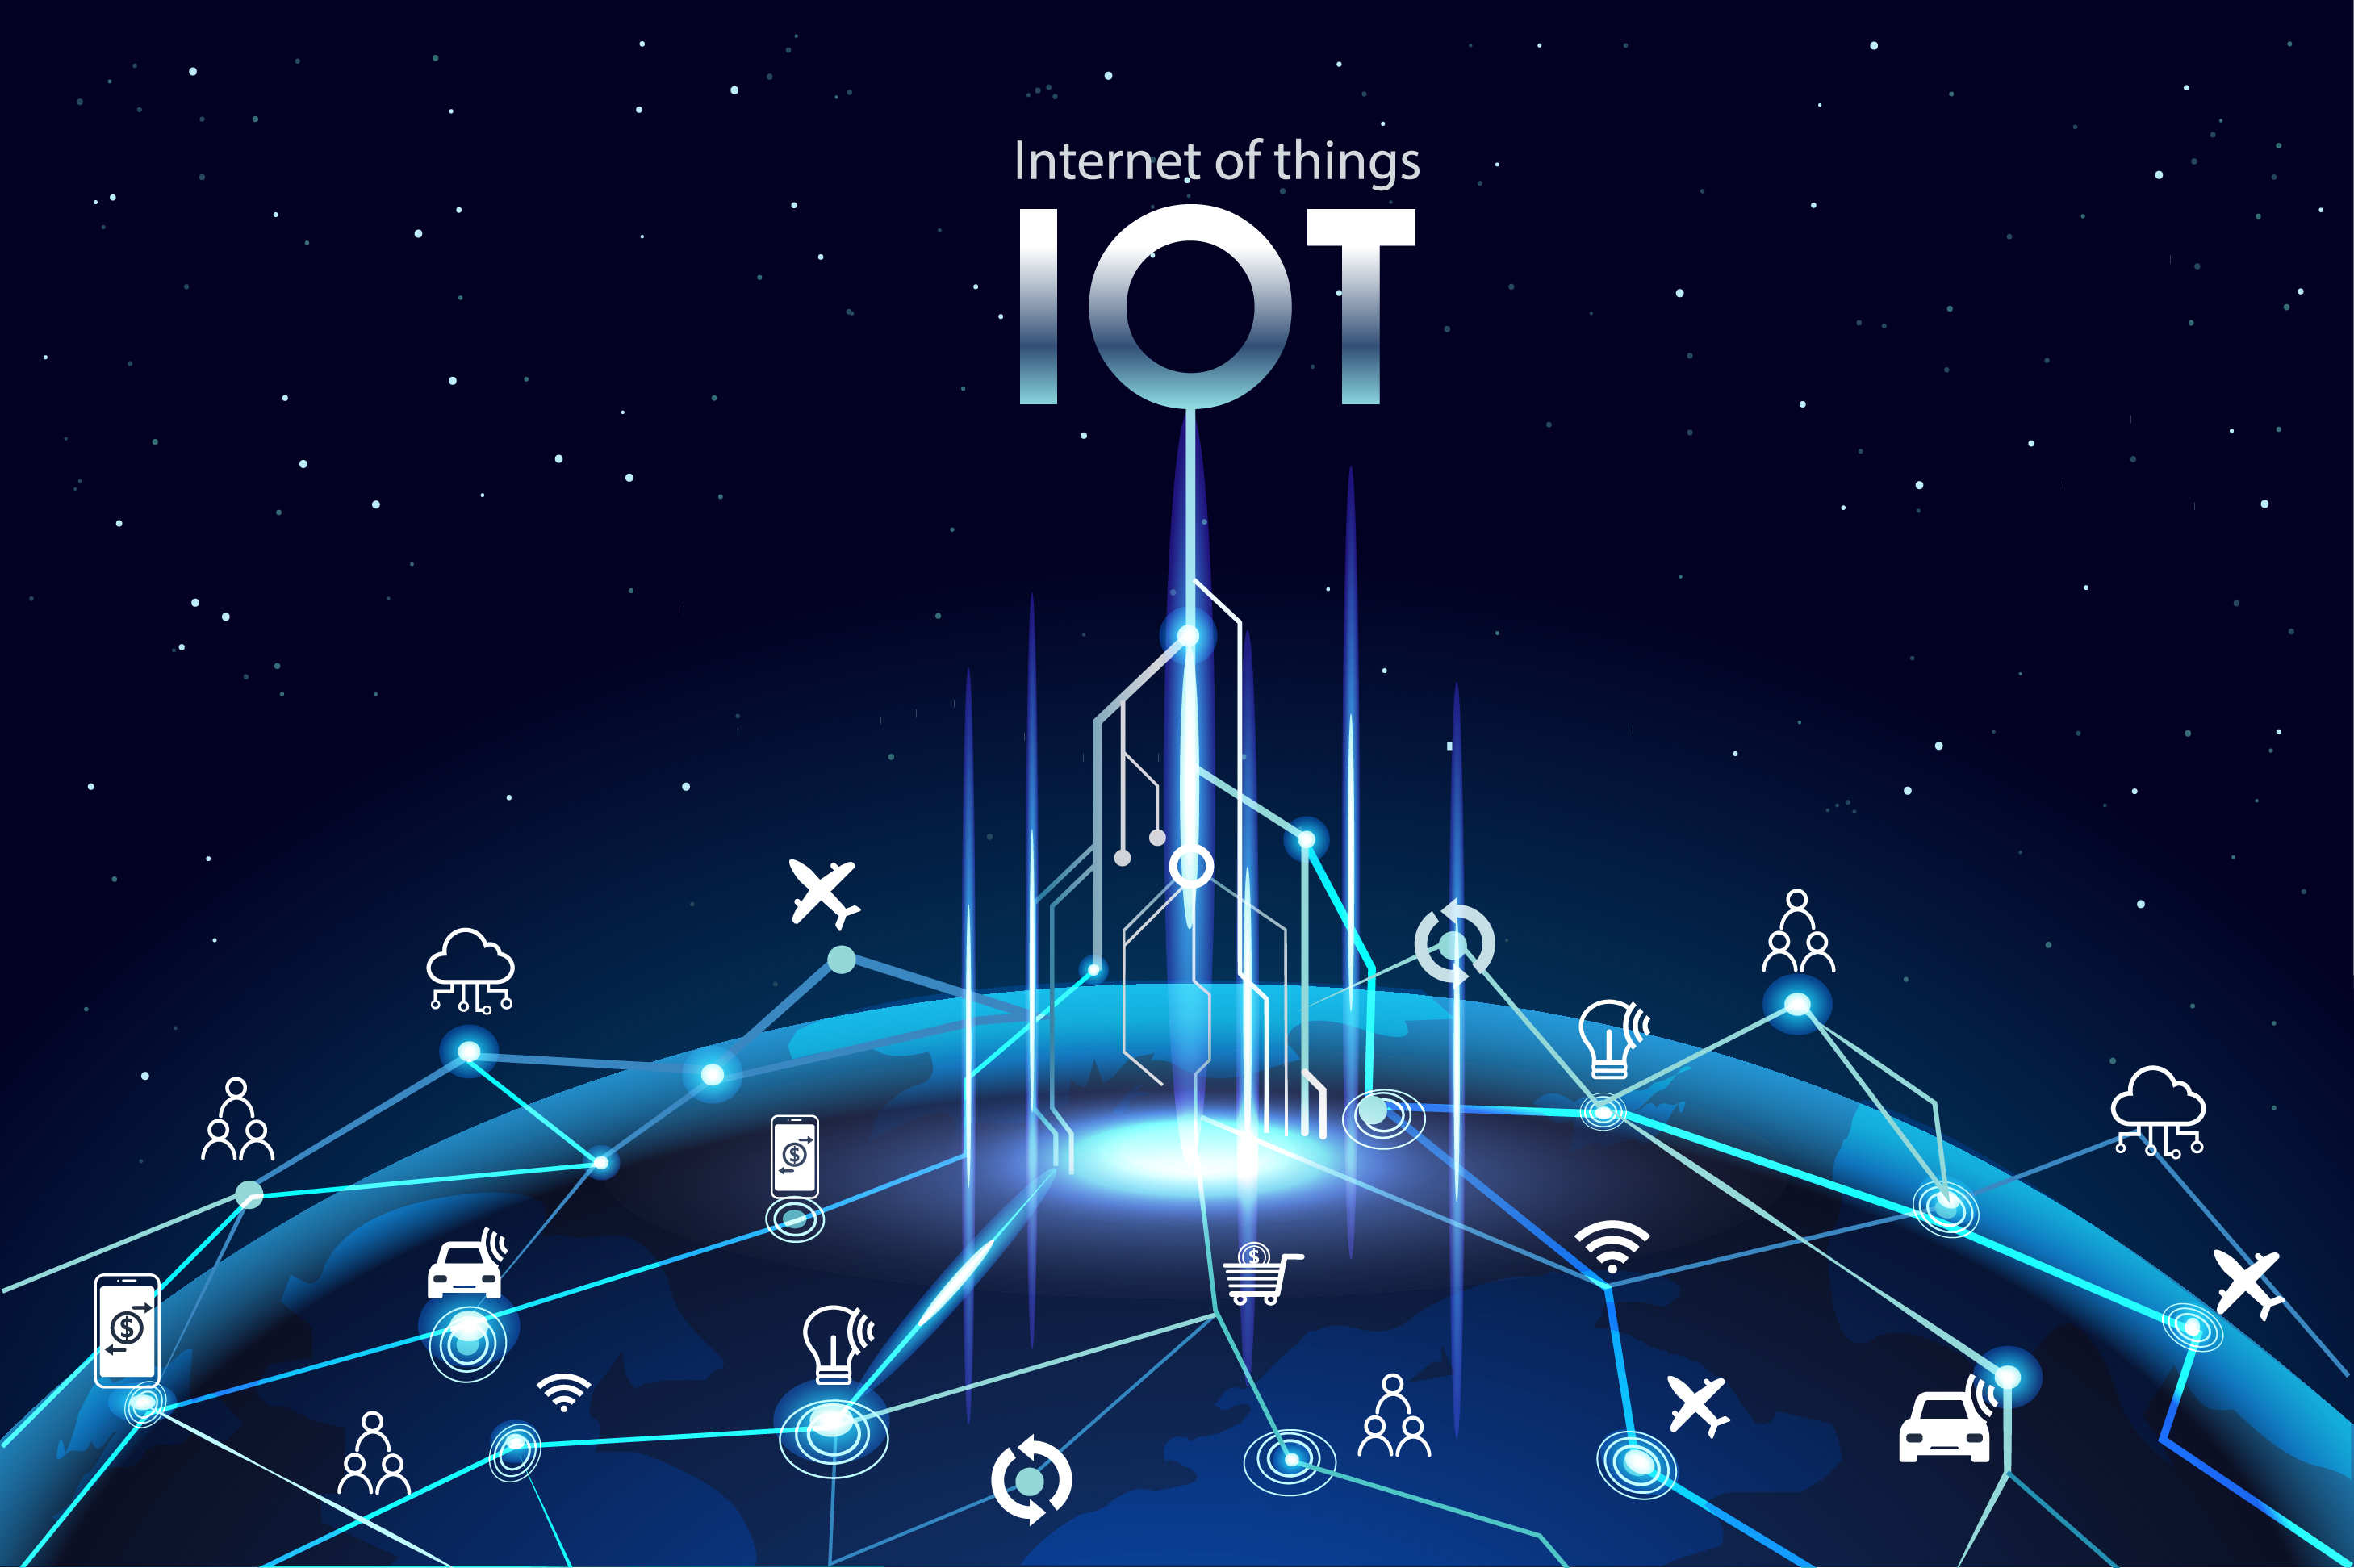 IoT Market to See Another Year of Double-Digit Growth